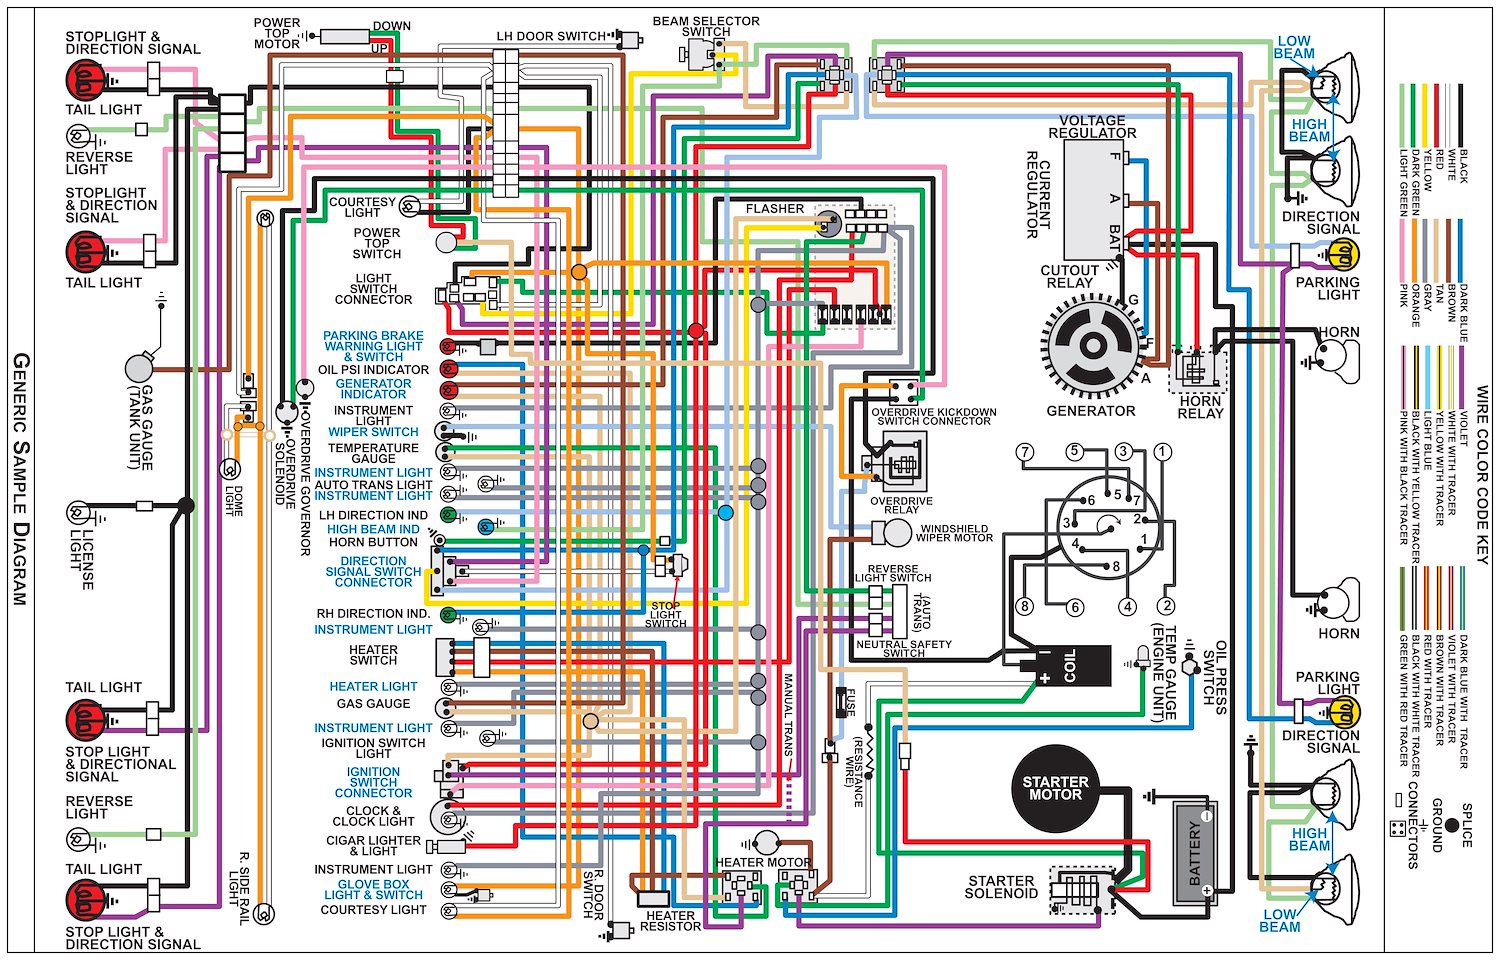 Wiring Diagram for 1973 Plymouth Road Runner, Satellite with Rallye Dash, 11 in x 17 in., Laminated